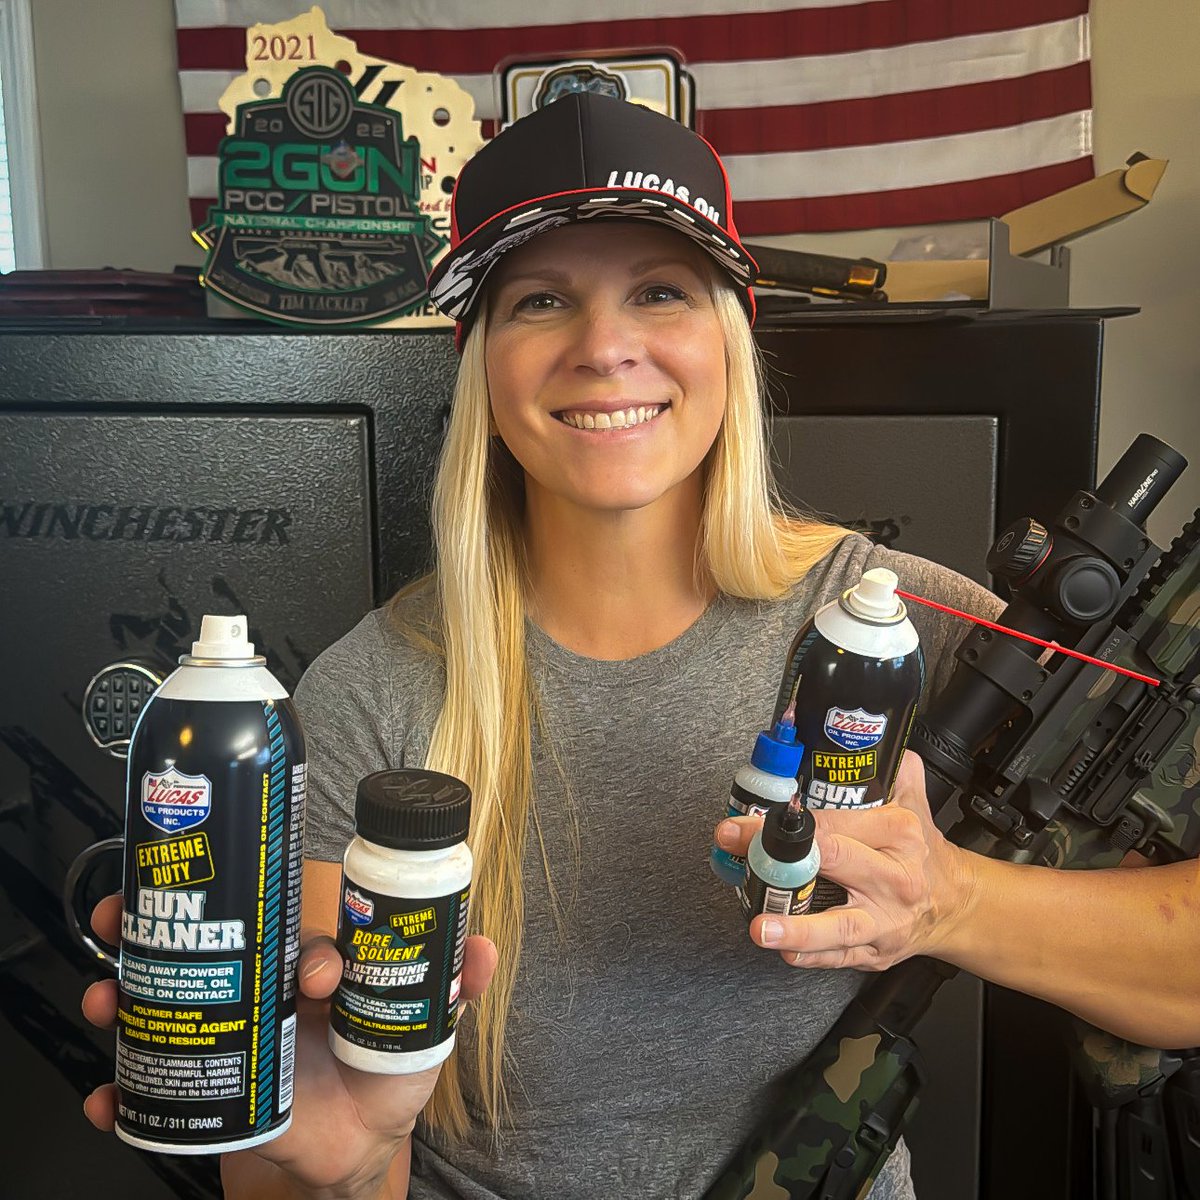 💪 'My most favorite product is the Extreme Duty Gun Oil and I love it because it stays where I put it, it works from 100º to -20ºF. And it's kept my guns running across the U.S. and around the globe!'

~@Yackley5ive | #LucasAlliance

#LucasWorks #Outdoors #Shooting #Pro #Hunting